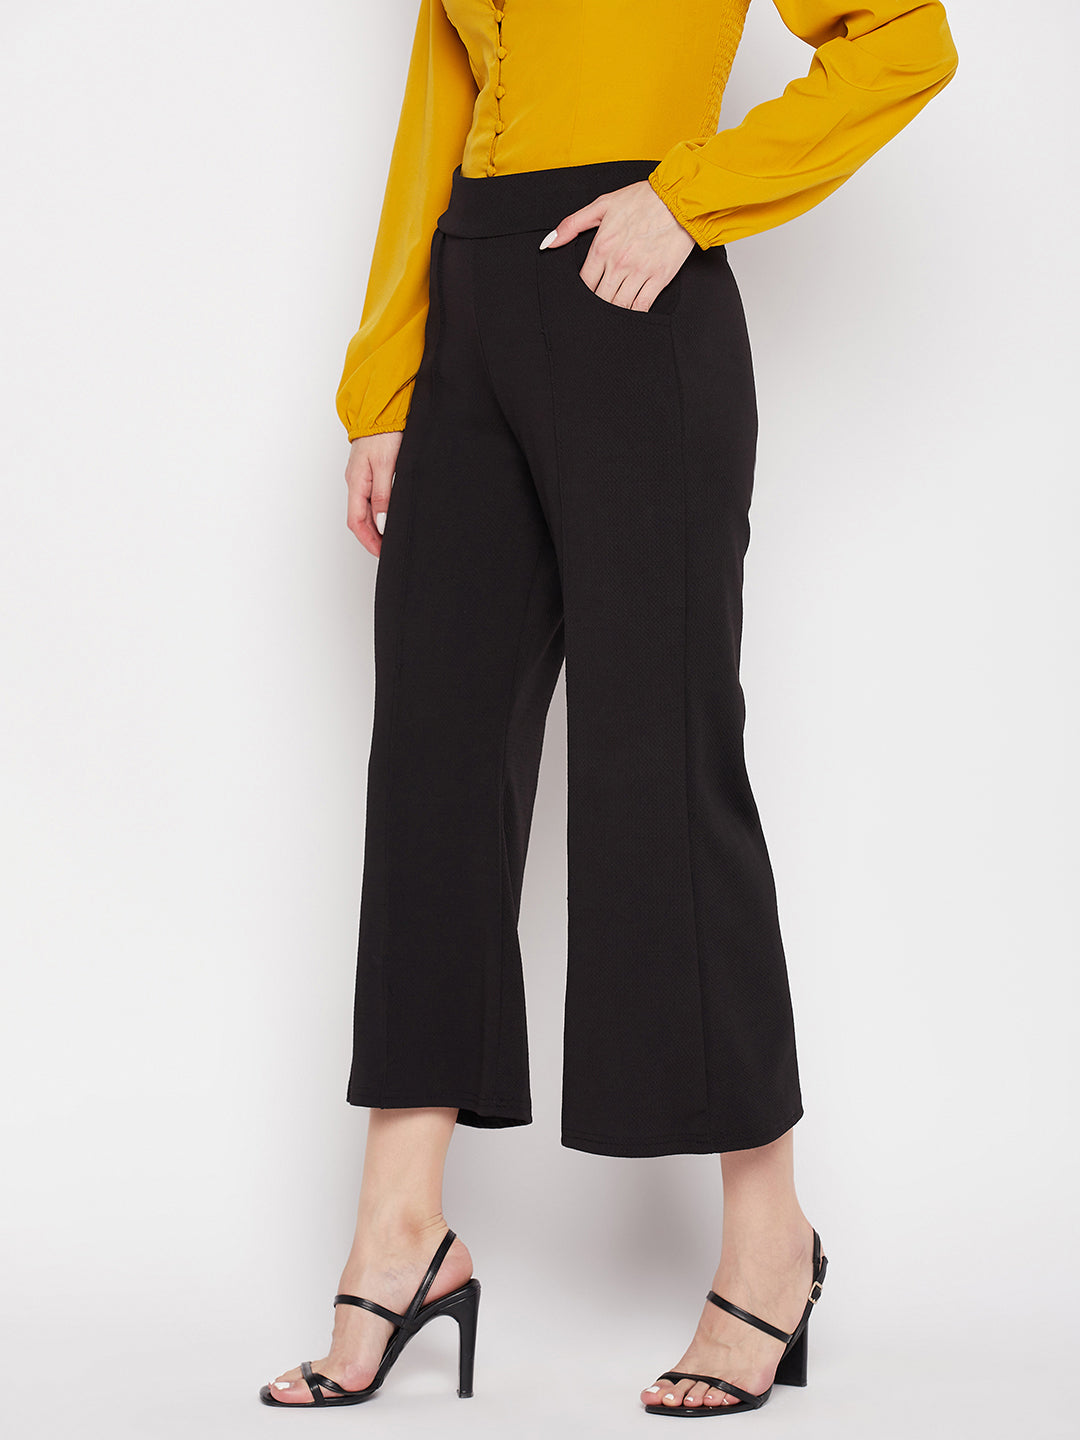 Clora Black Regular Fit Solid Bootcut Trousers